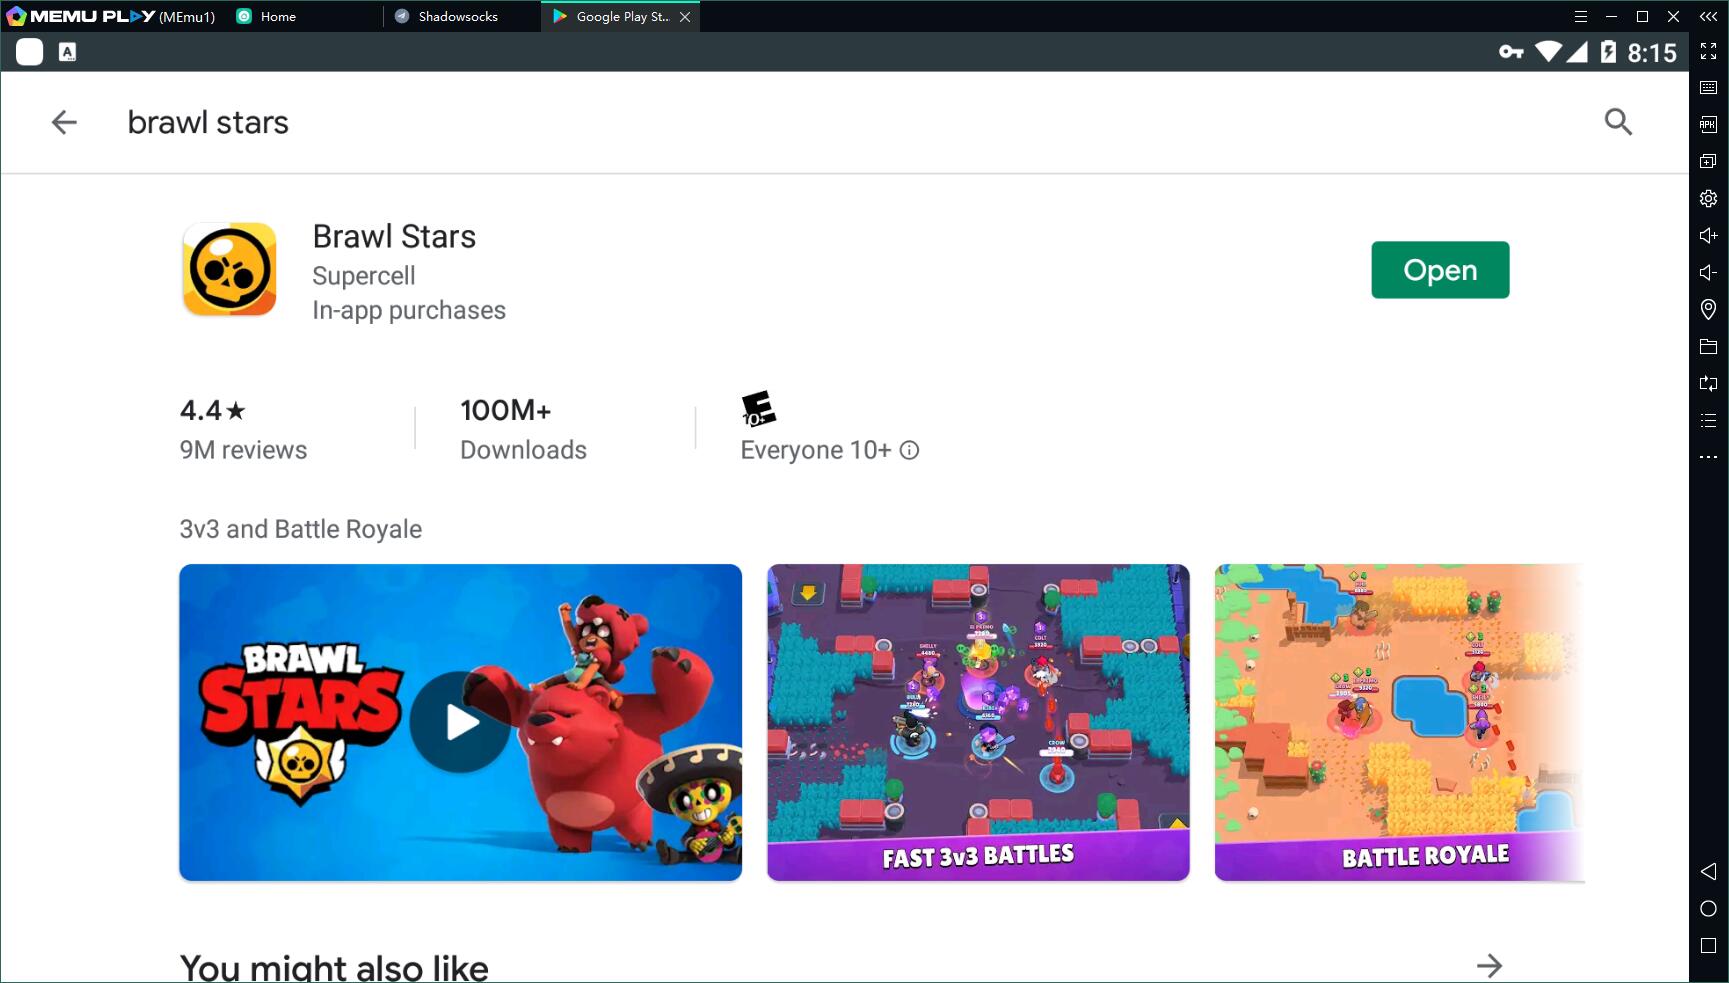 Pocket Gamer - Everything you need to win in Brawl Stars: Brawl Stars from  Supercell, the developer behind the awesome Clash… - View…